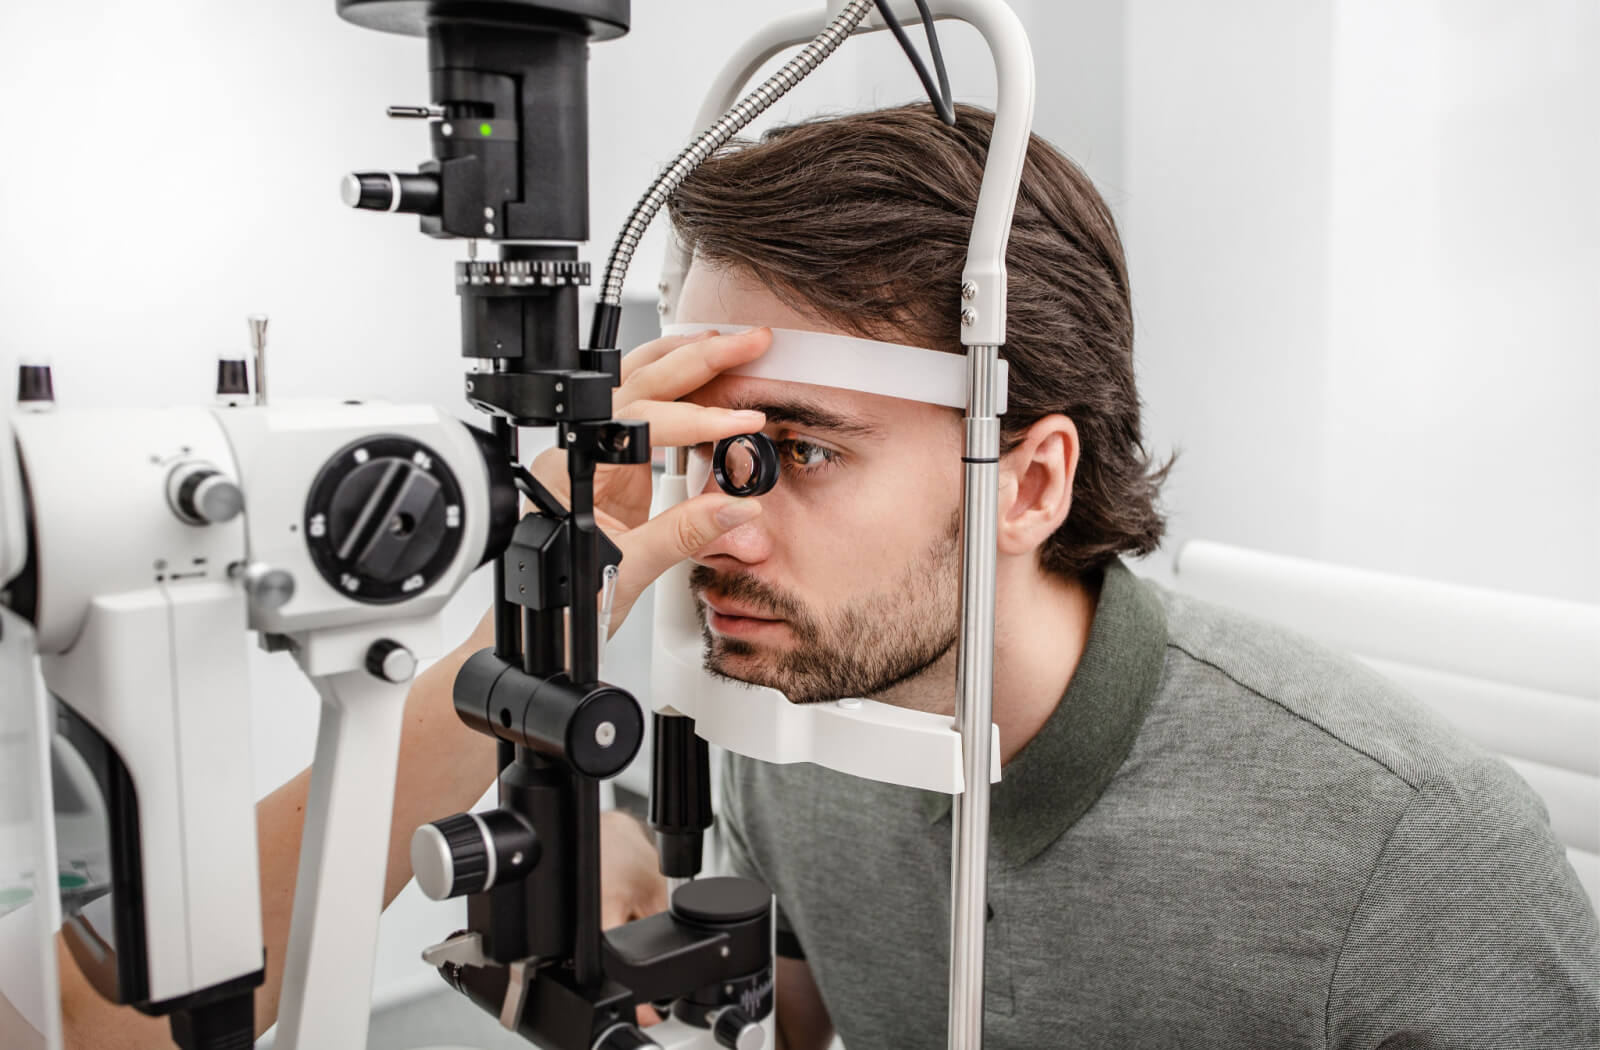 A man is undergoing an eye check with the slit lamp. He regularly has his eyes checked as he age.